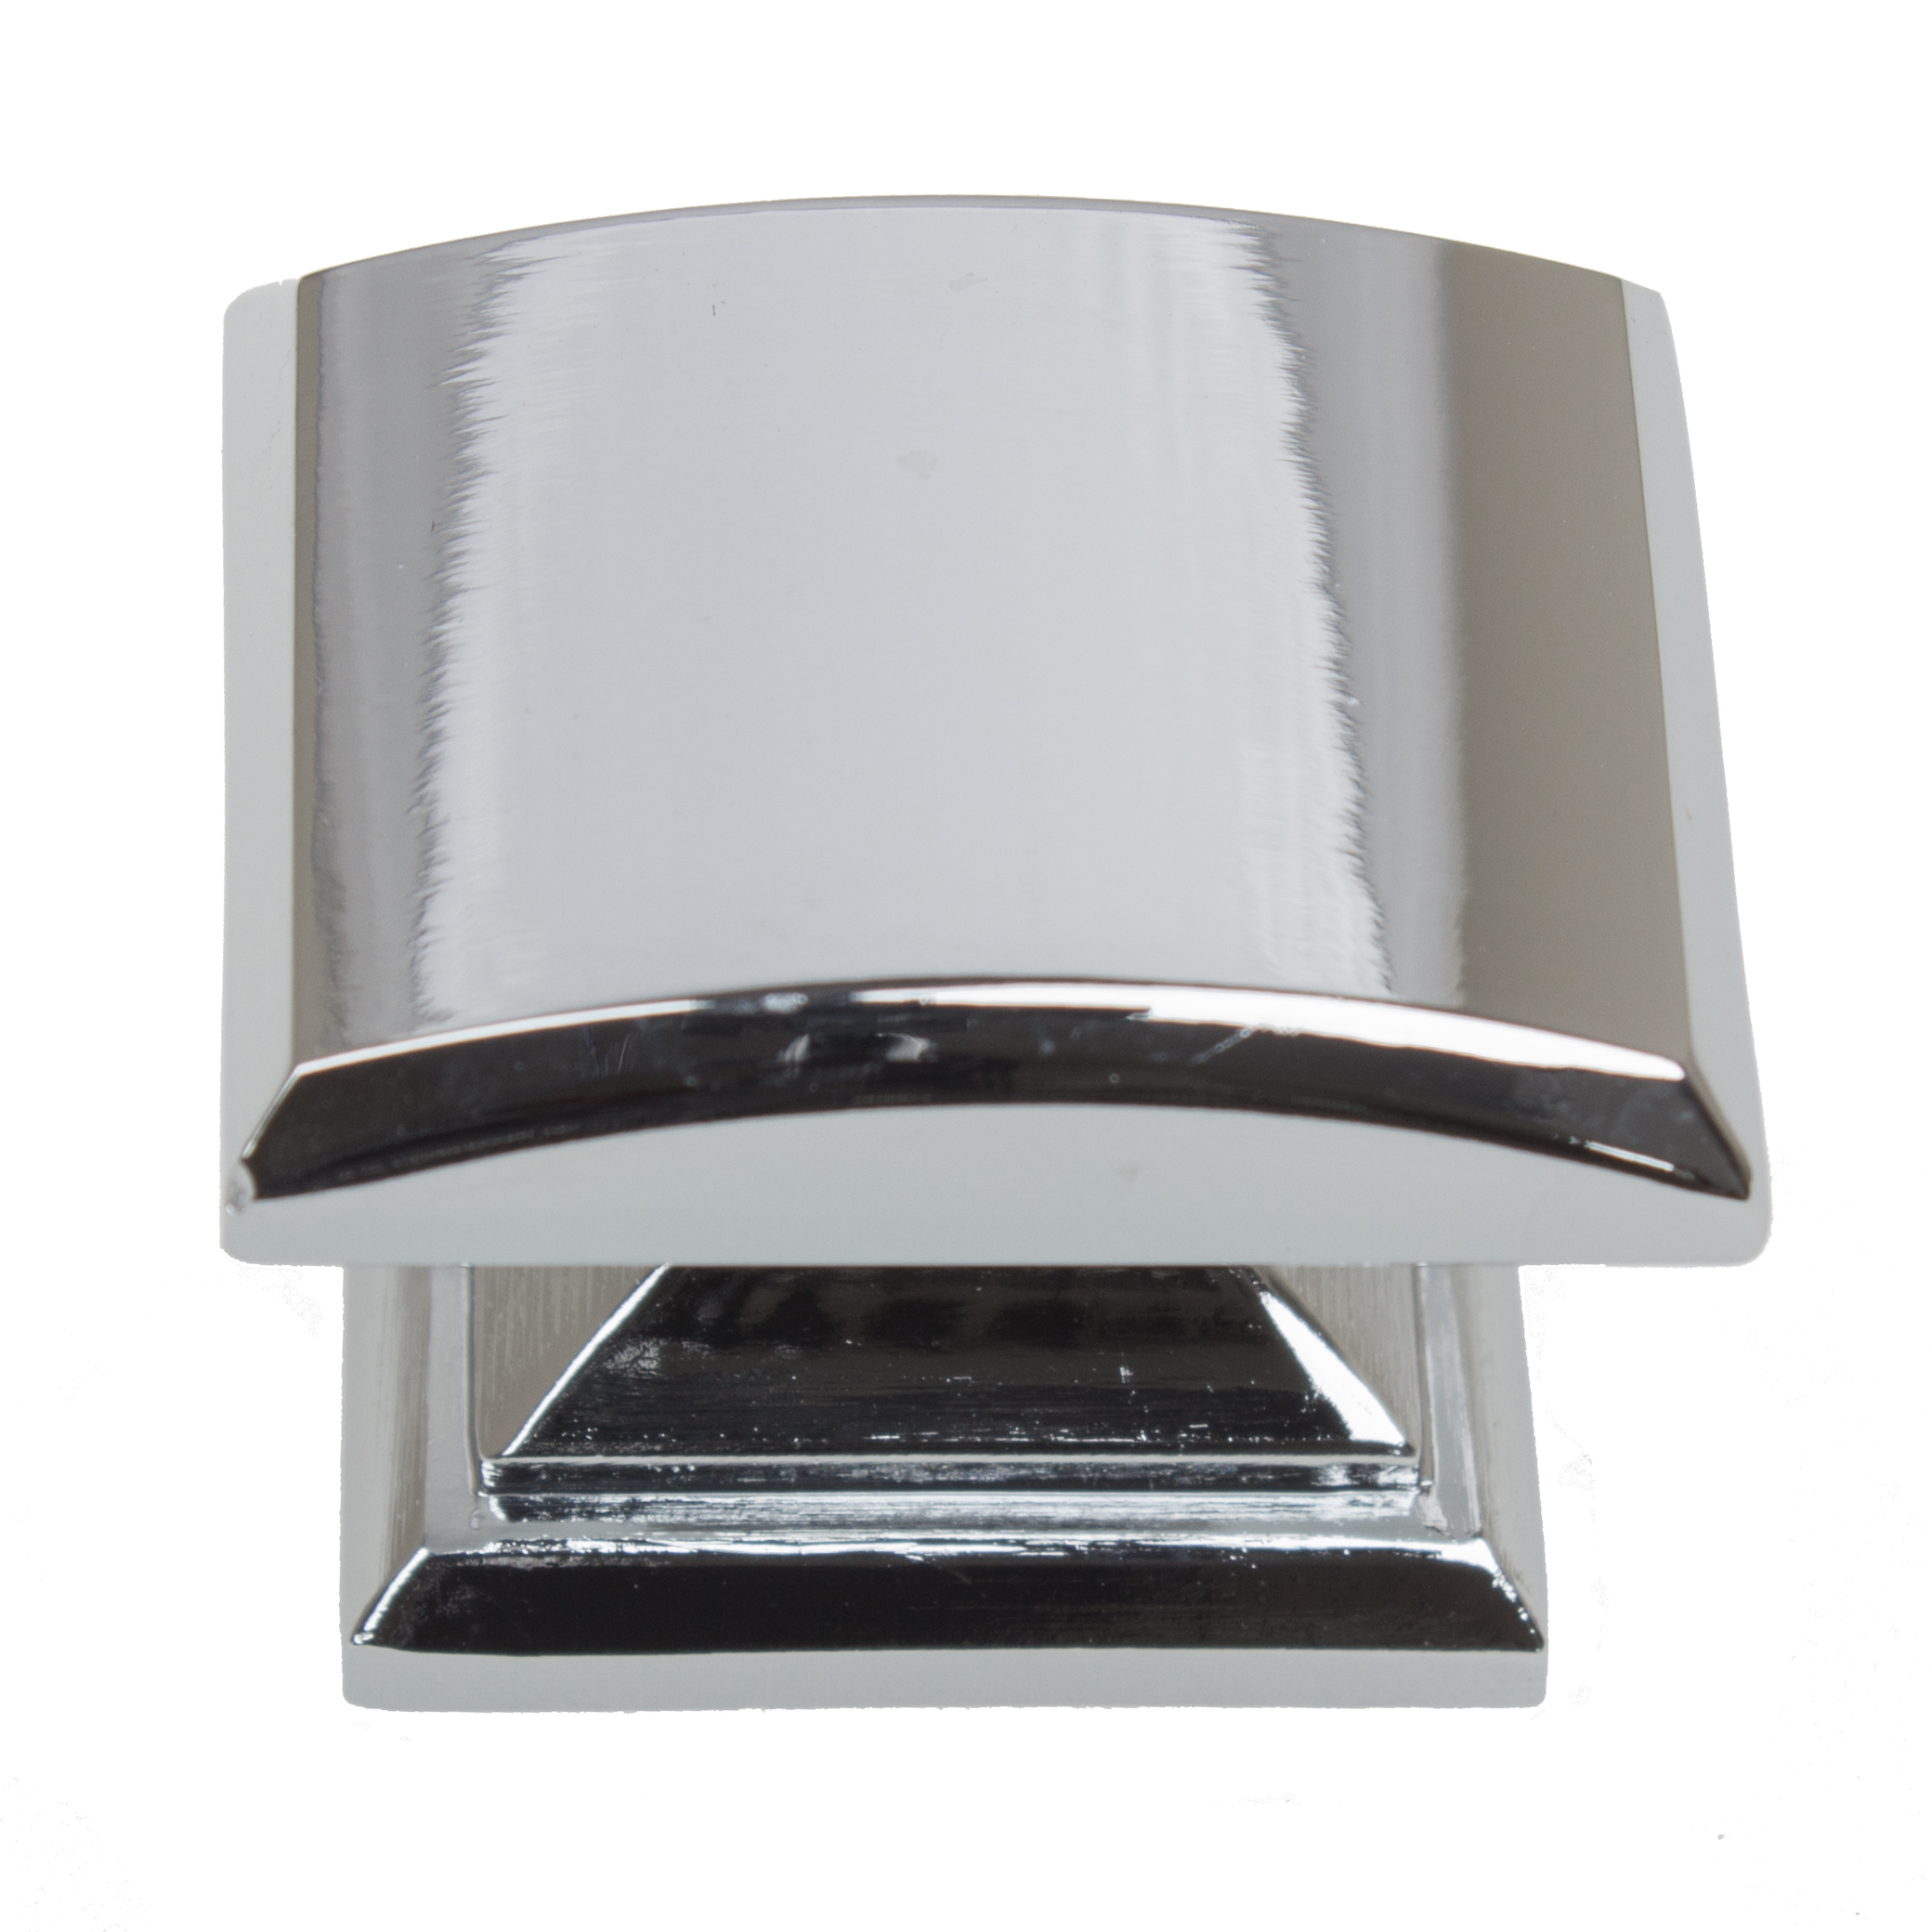 GlideRite 1-1/4 in. Domed Convex Square Cabinet Knob, Polished Chrome, Pack of 10 - image 1 of 5